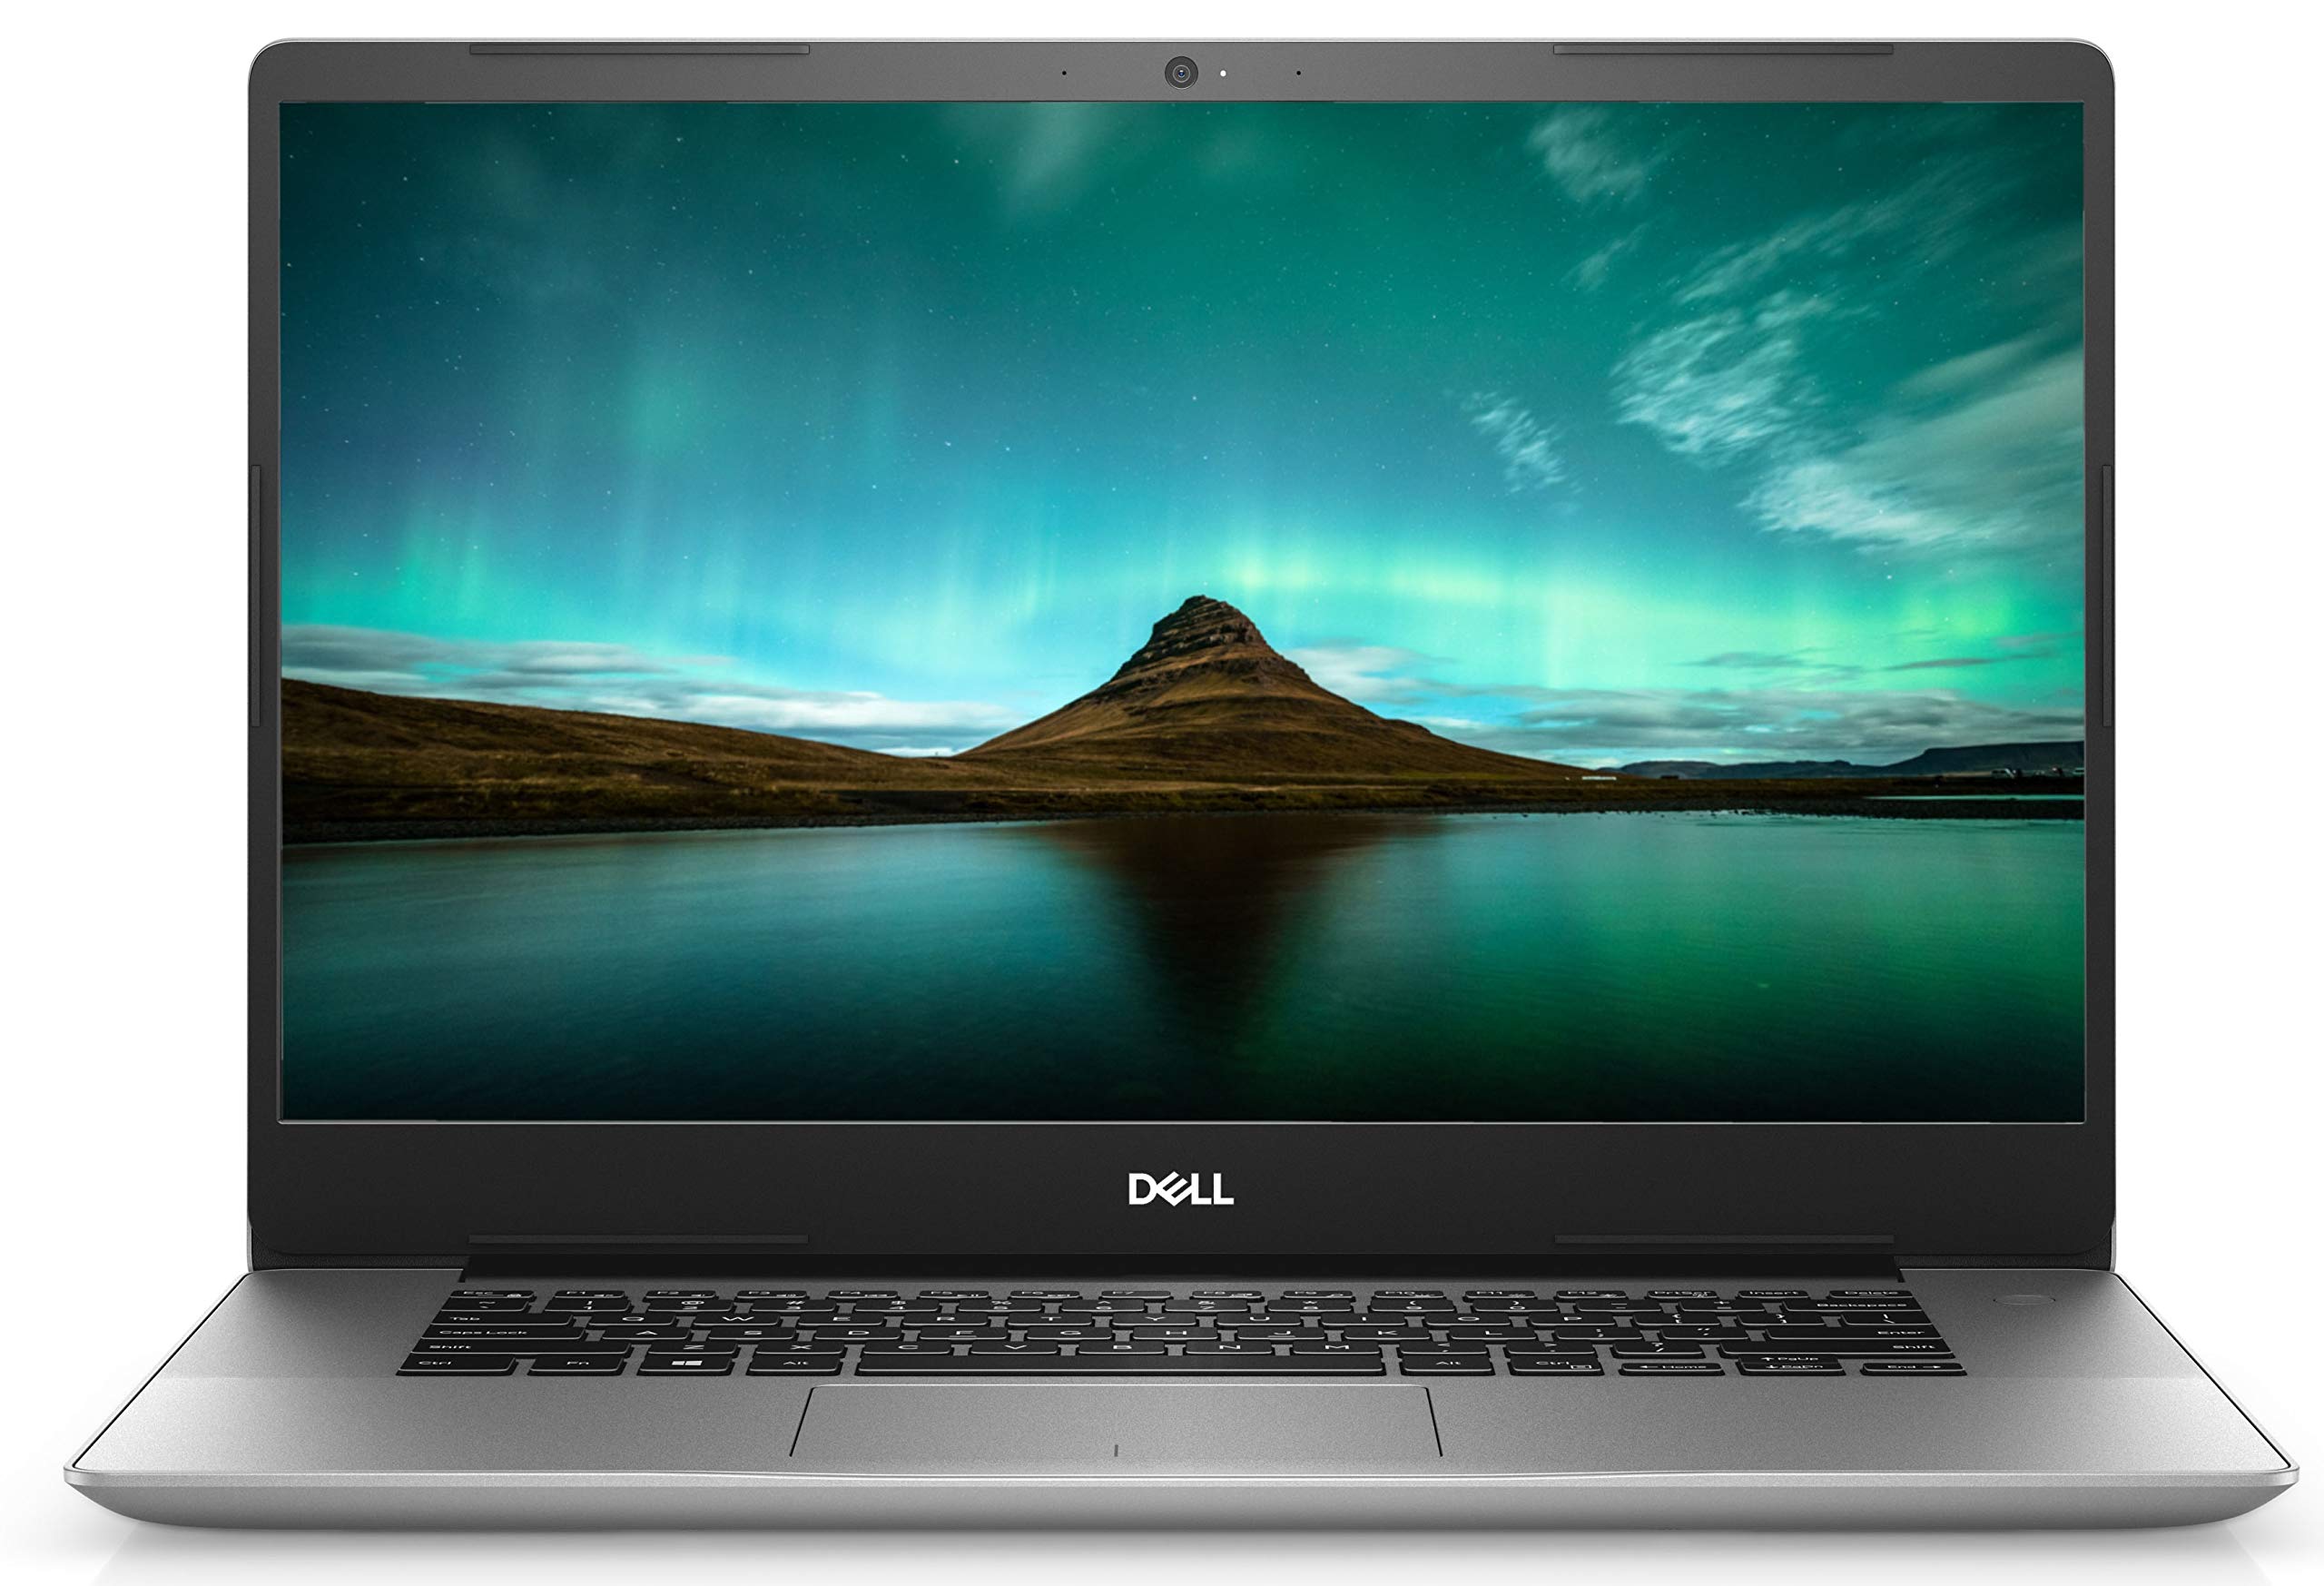  Dell Inspiron 15 5585 Notebook